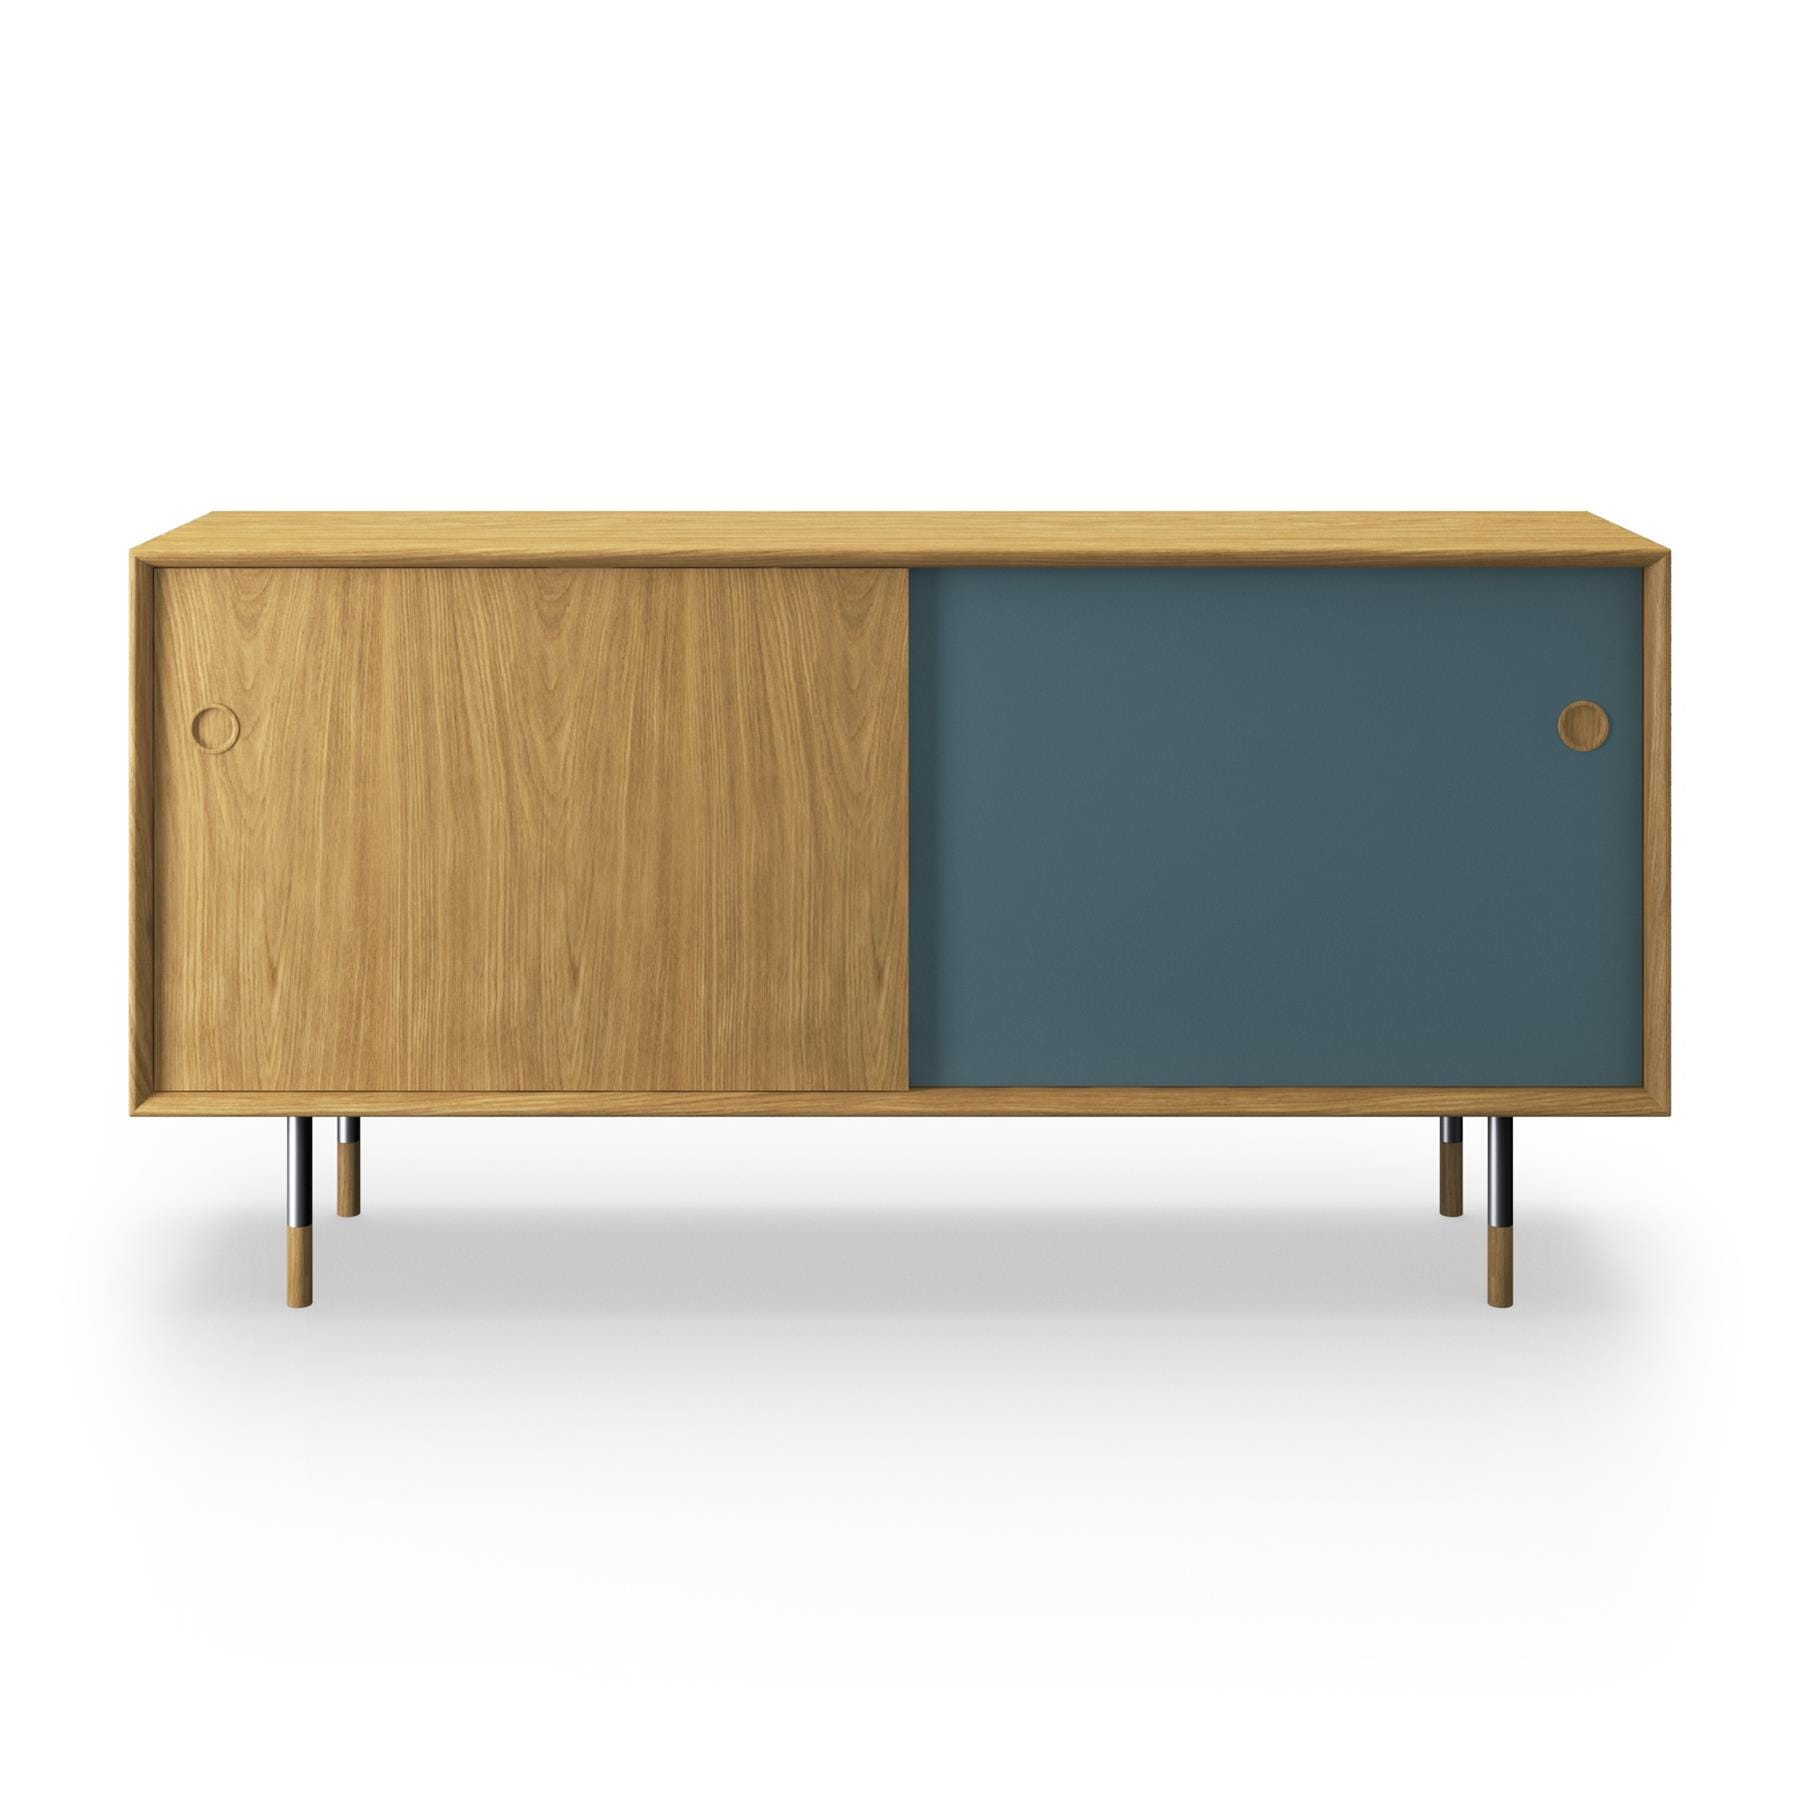 Sibast No 11 Sideboard Natural Oiled Oak Blue And Natural Front Metal Legs Light Wood Designer Furniture From Holloways Of Ludlow